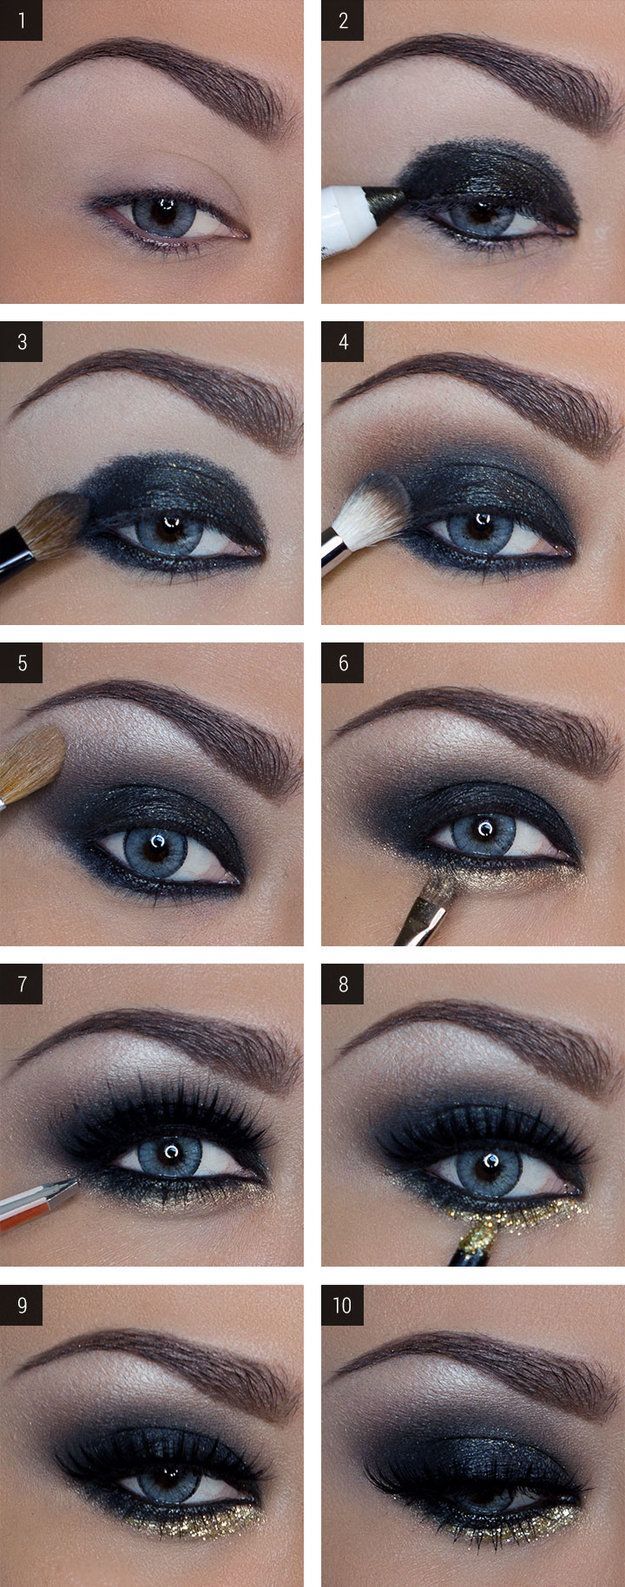 How to Do Dramatic Smokey Eyes | Makeup for Blue Eye by Makeup Tutorials at www....